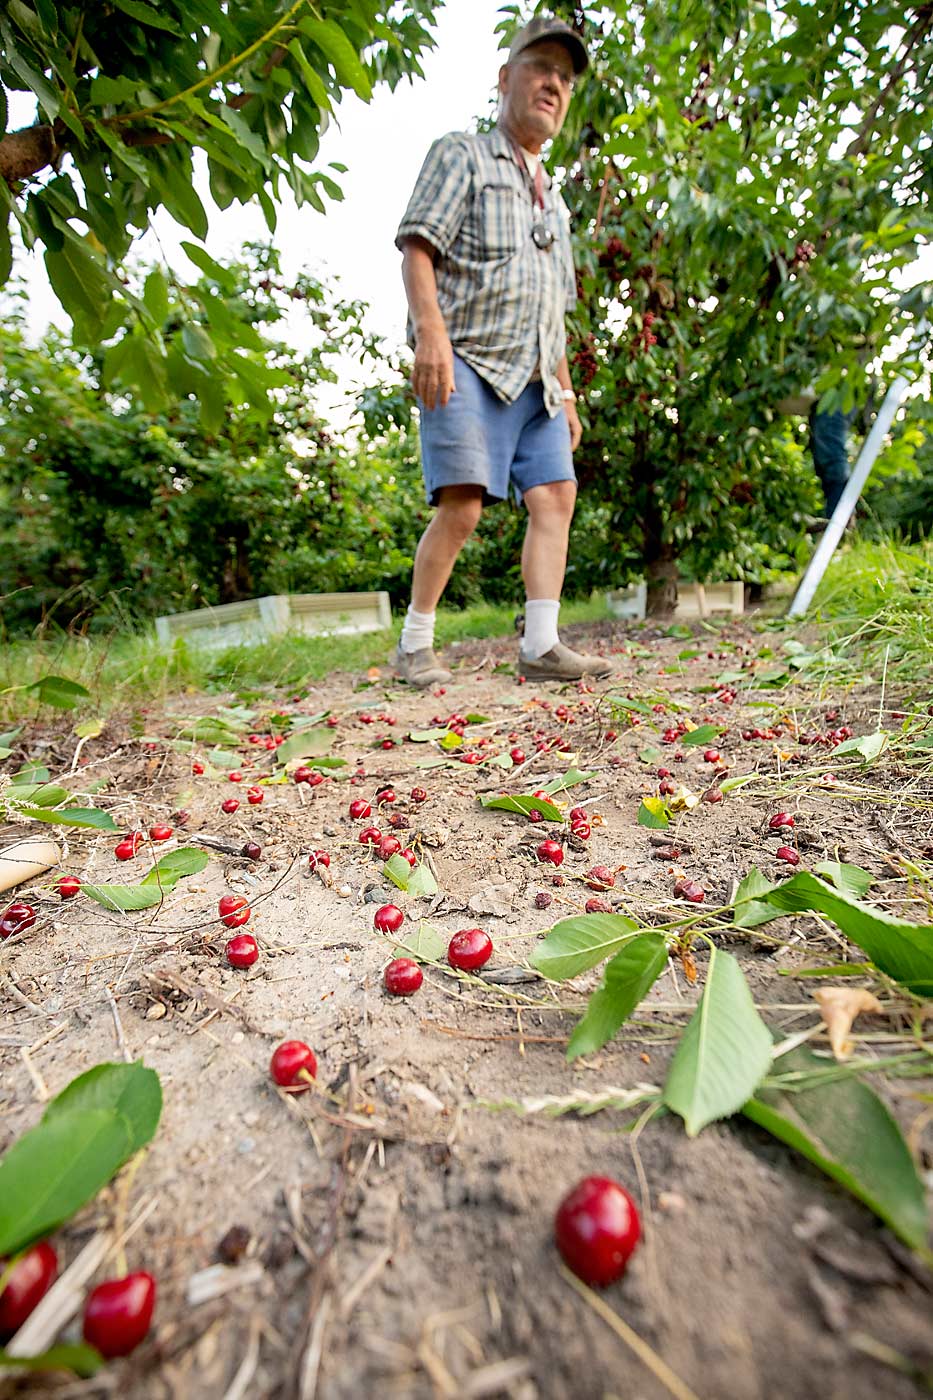 Grower Eric Olson instructed his crews to drop shriveled cherries, located on the outside of clusters, to the ground and harvest only the unscorched fruit underneath. (TJ Mullinax/Good Fruit Grower)